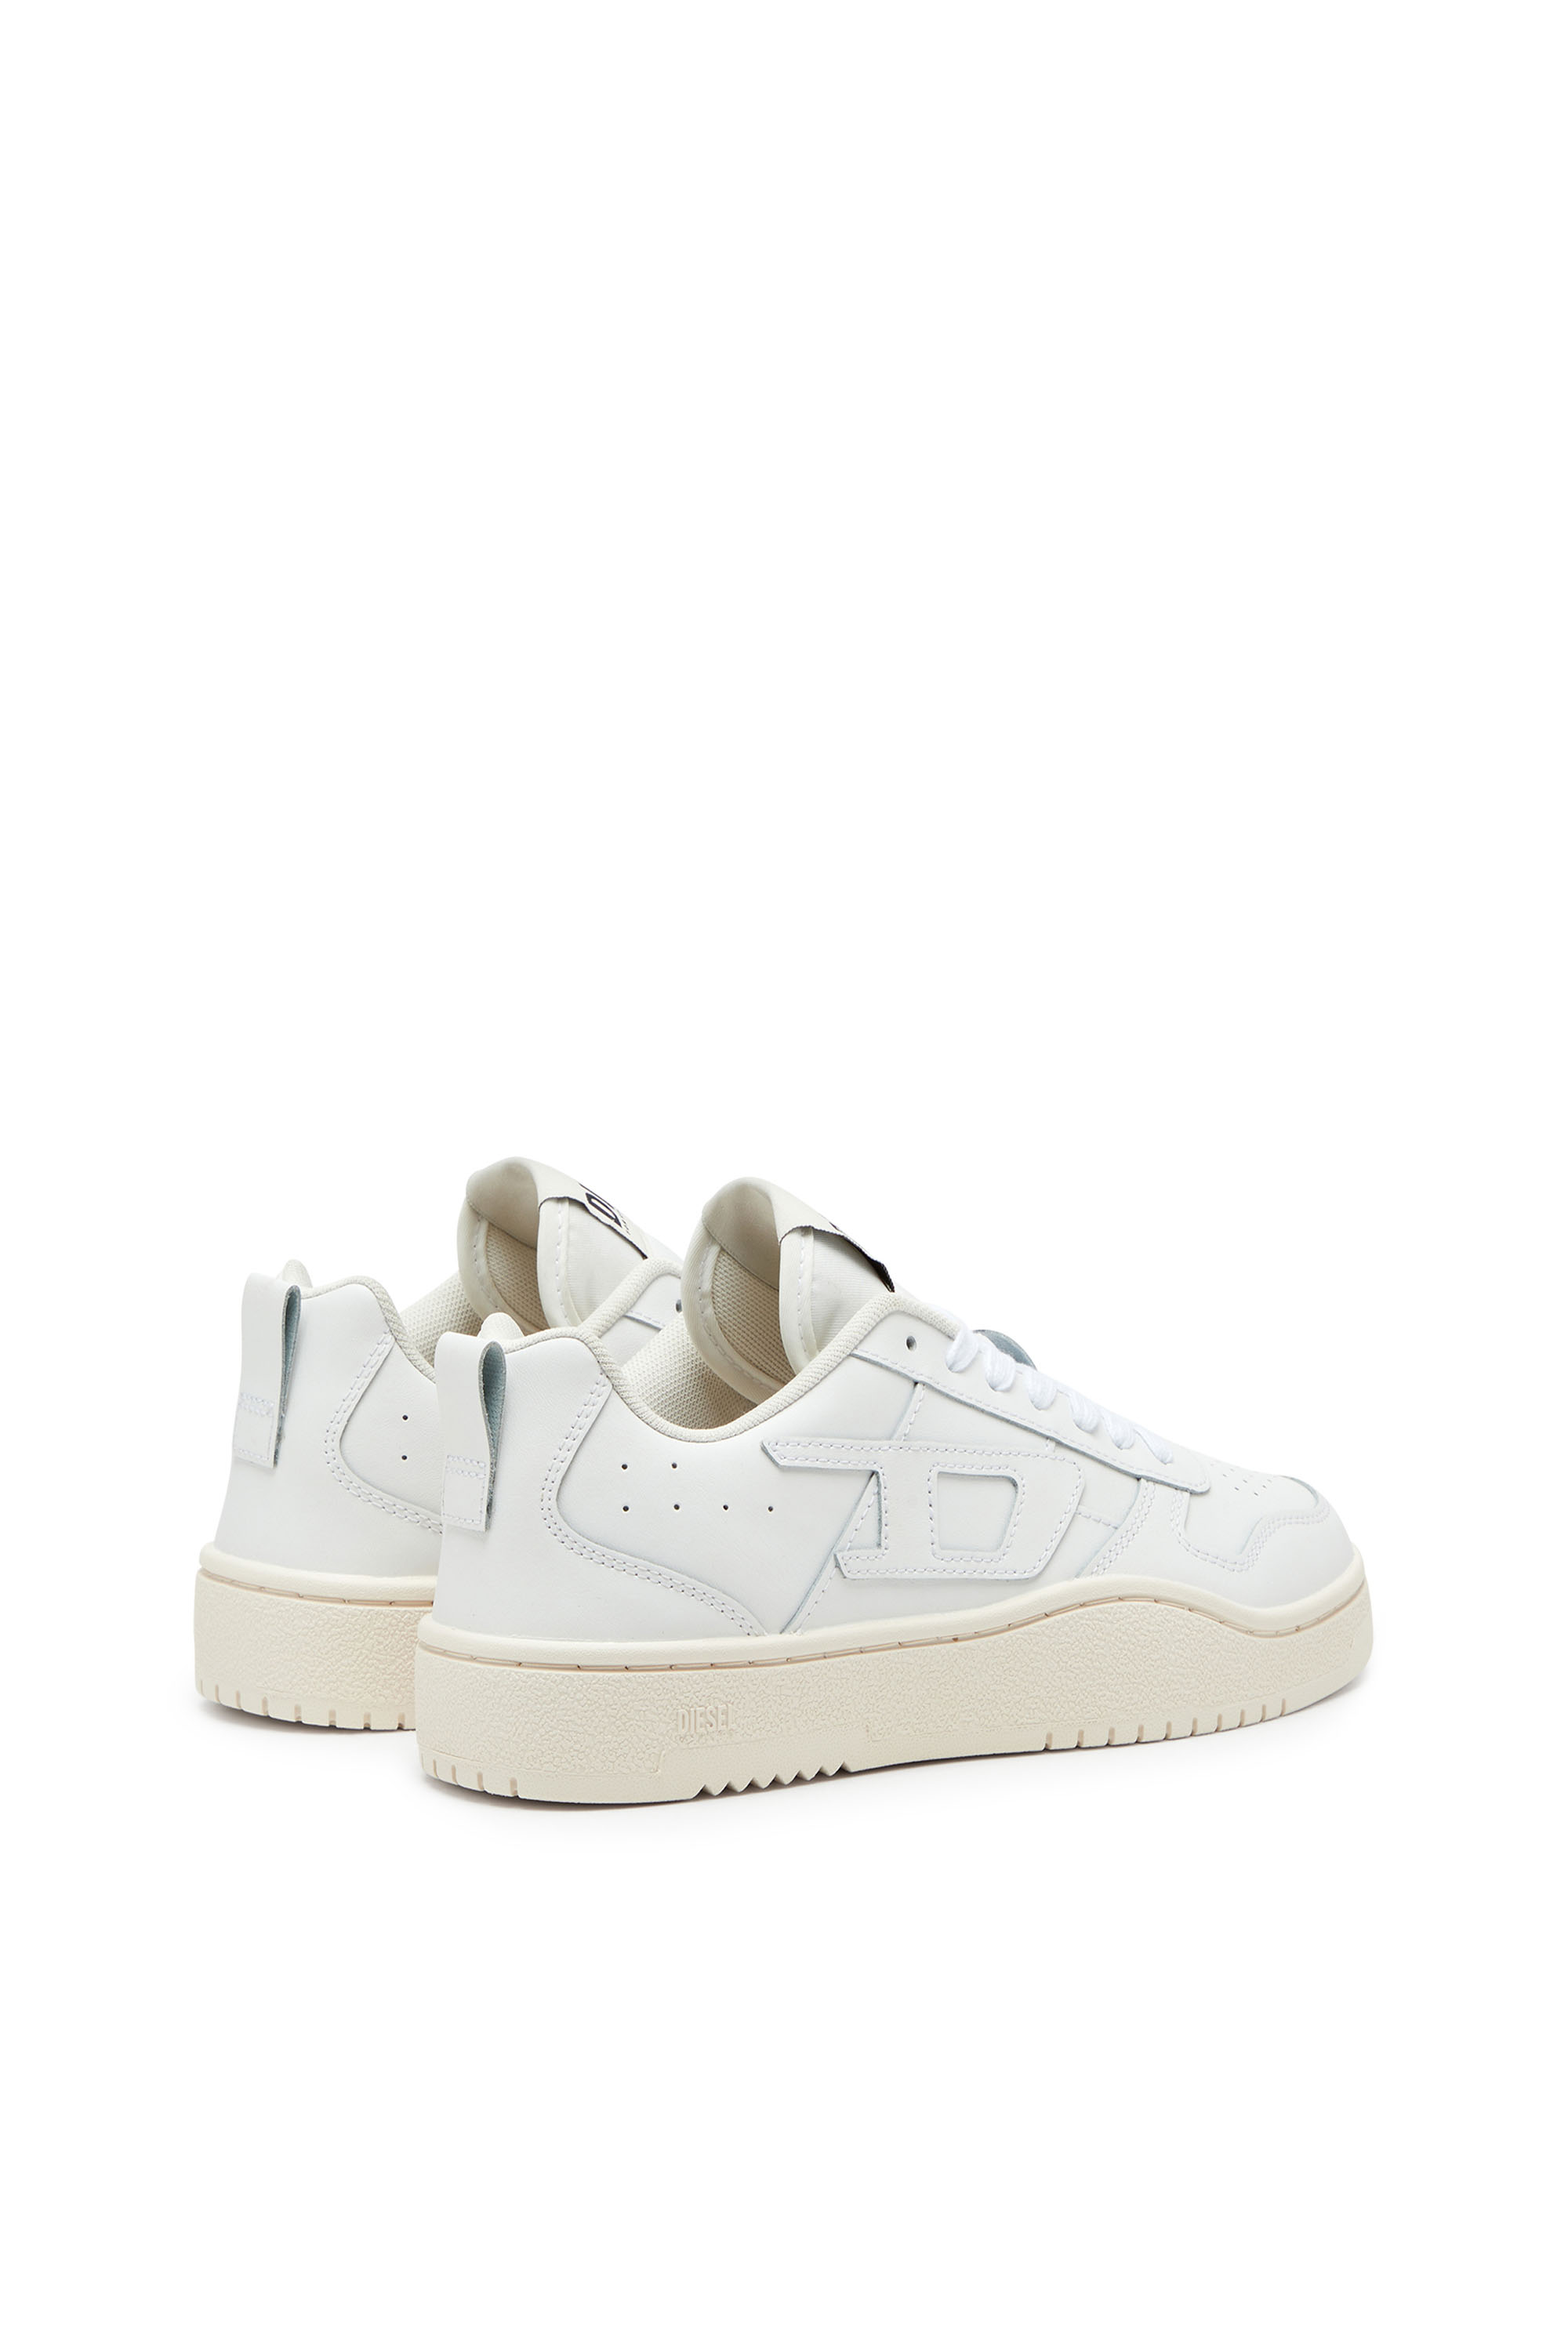 Diesel - S-UKIYO V2 LOW W, Woman S-Ukiyo Low-Low-top sneakers in leather and nylon in White - Image 3